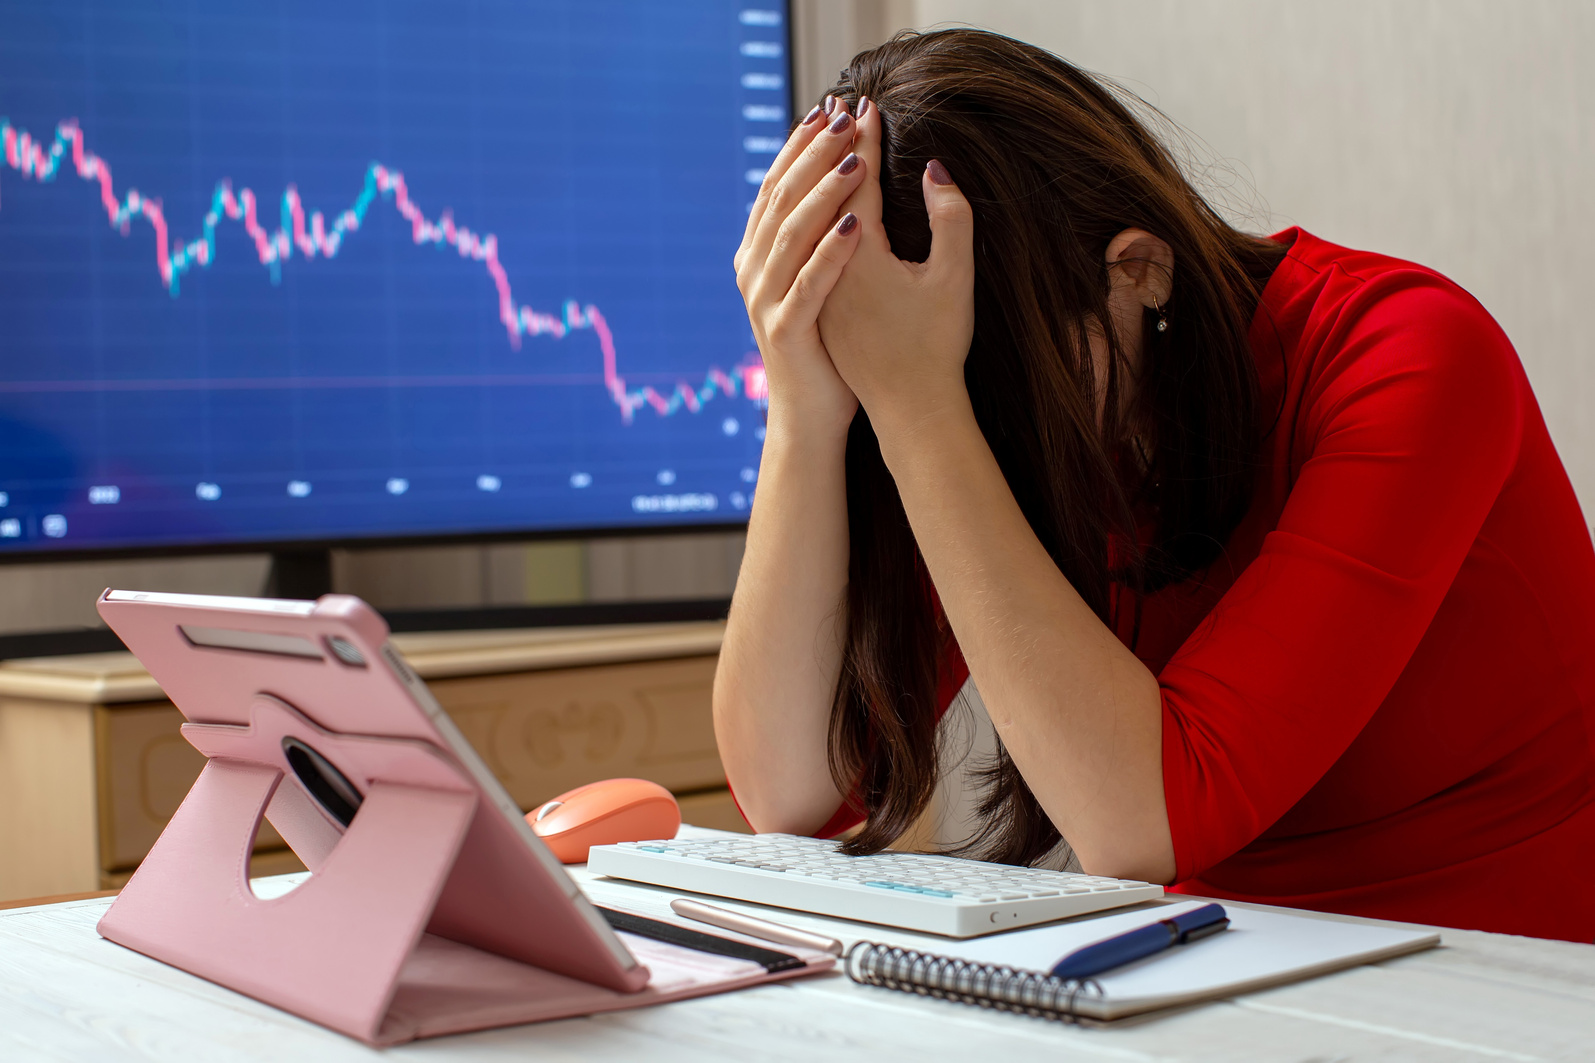 Girl shocked by the fall of the market, bankrupt failure